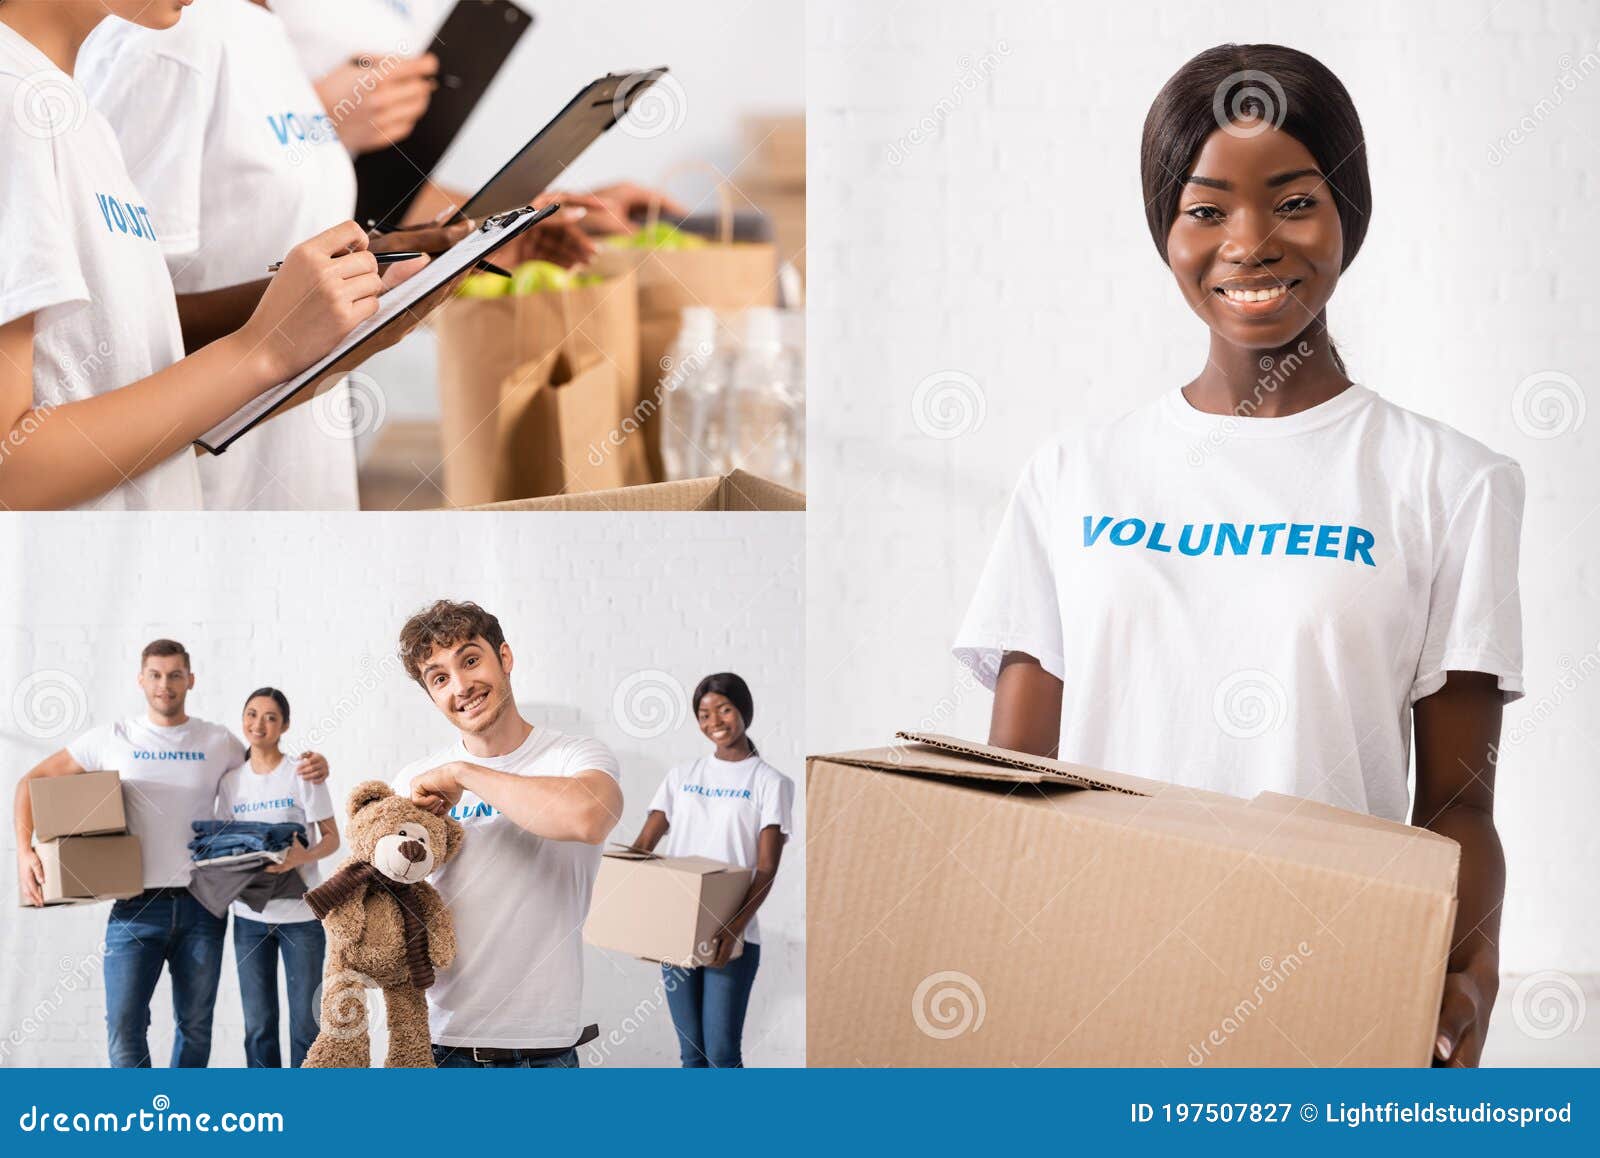 collage of volunteers with clipboards, soft